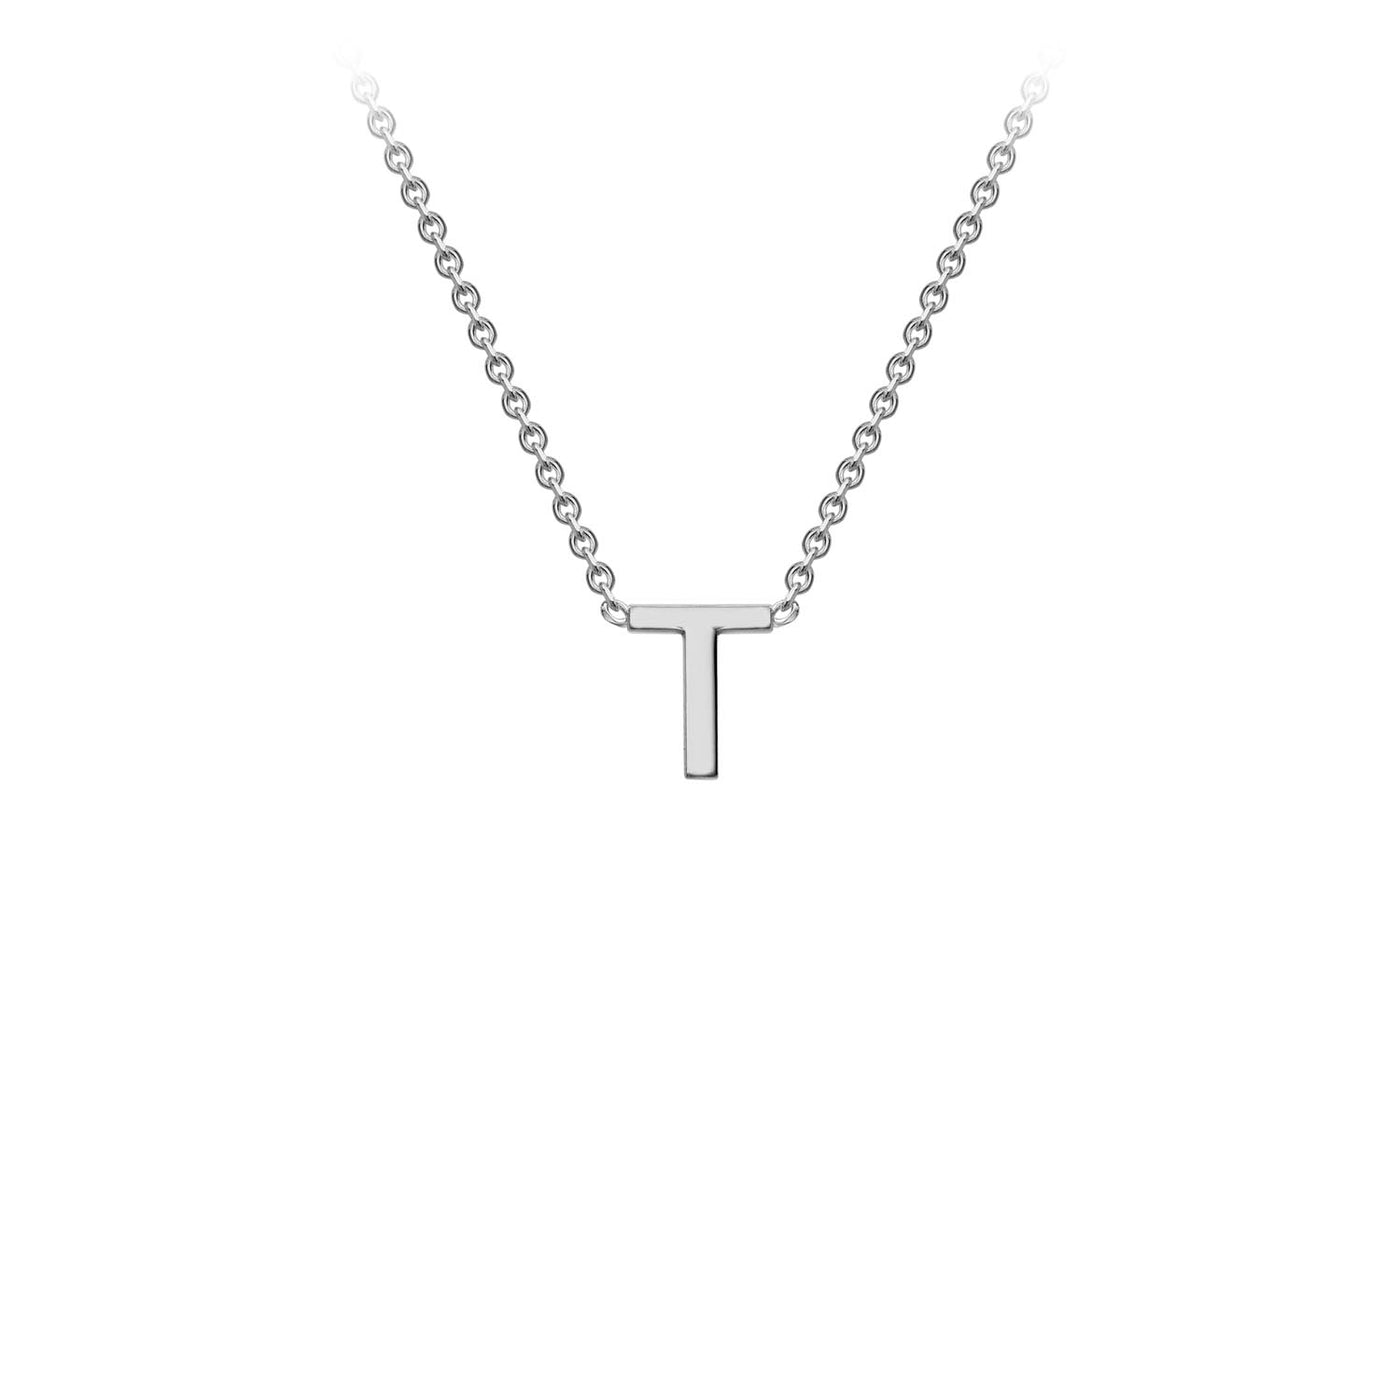 9ct White Gold Petite Initial T Necklace